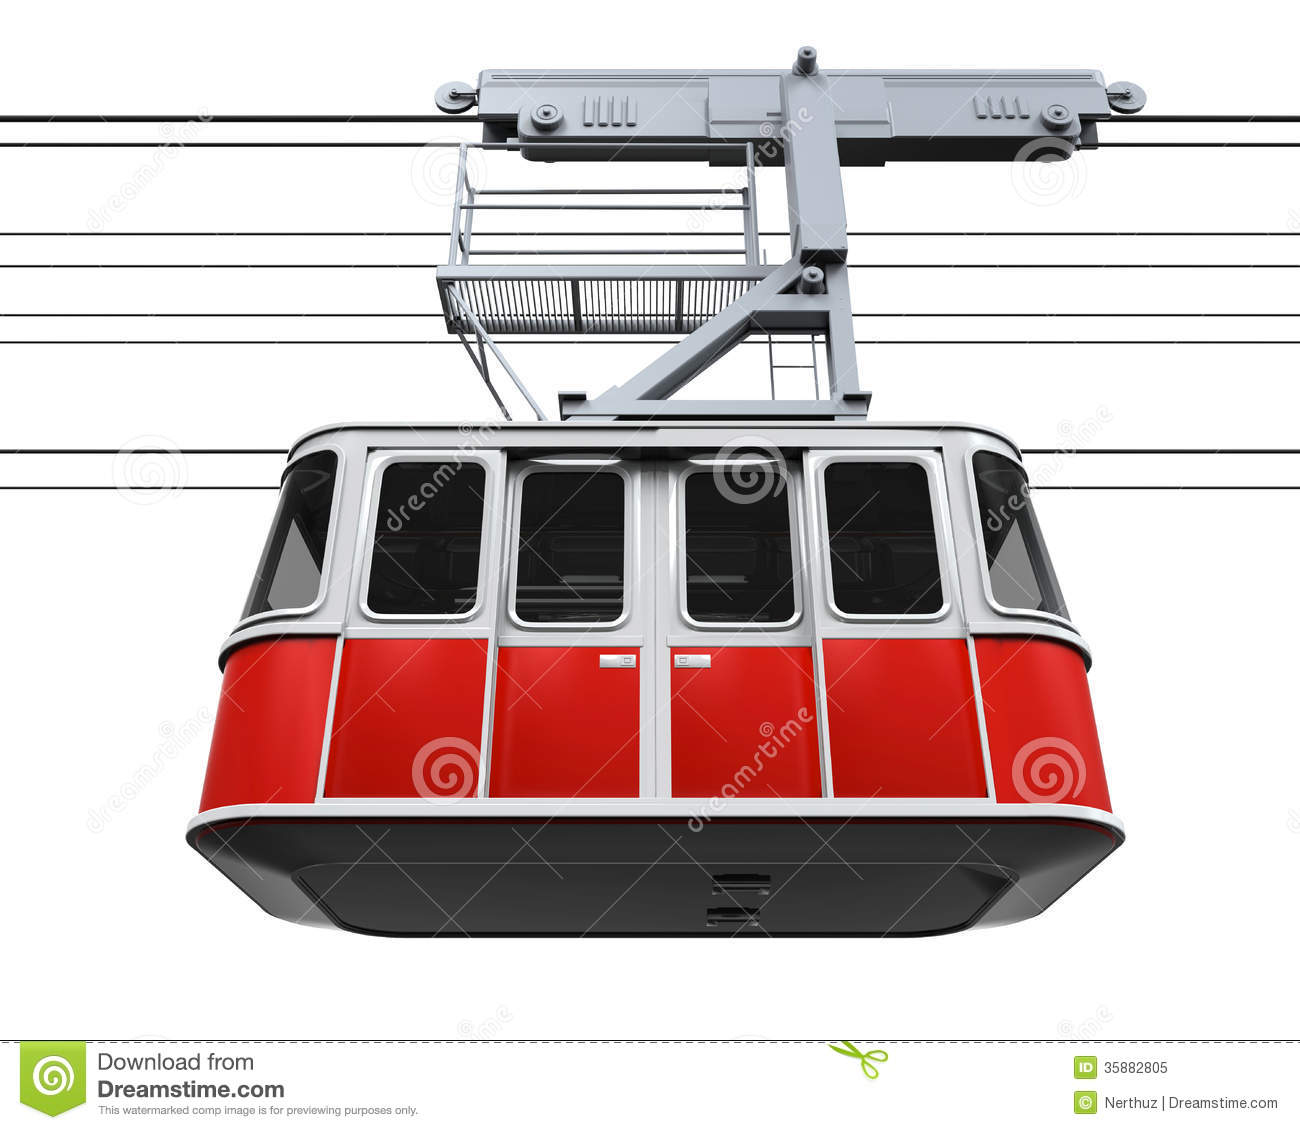 Ropeway clipart - Clipground